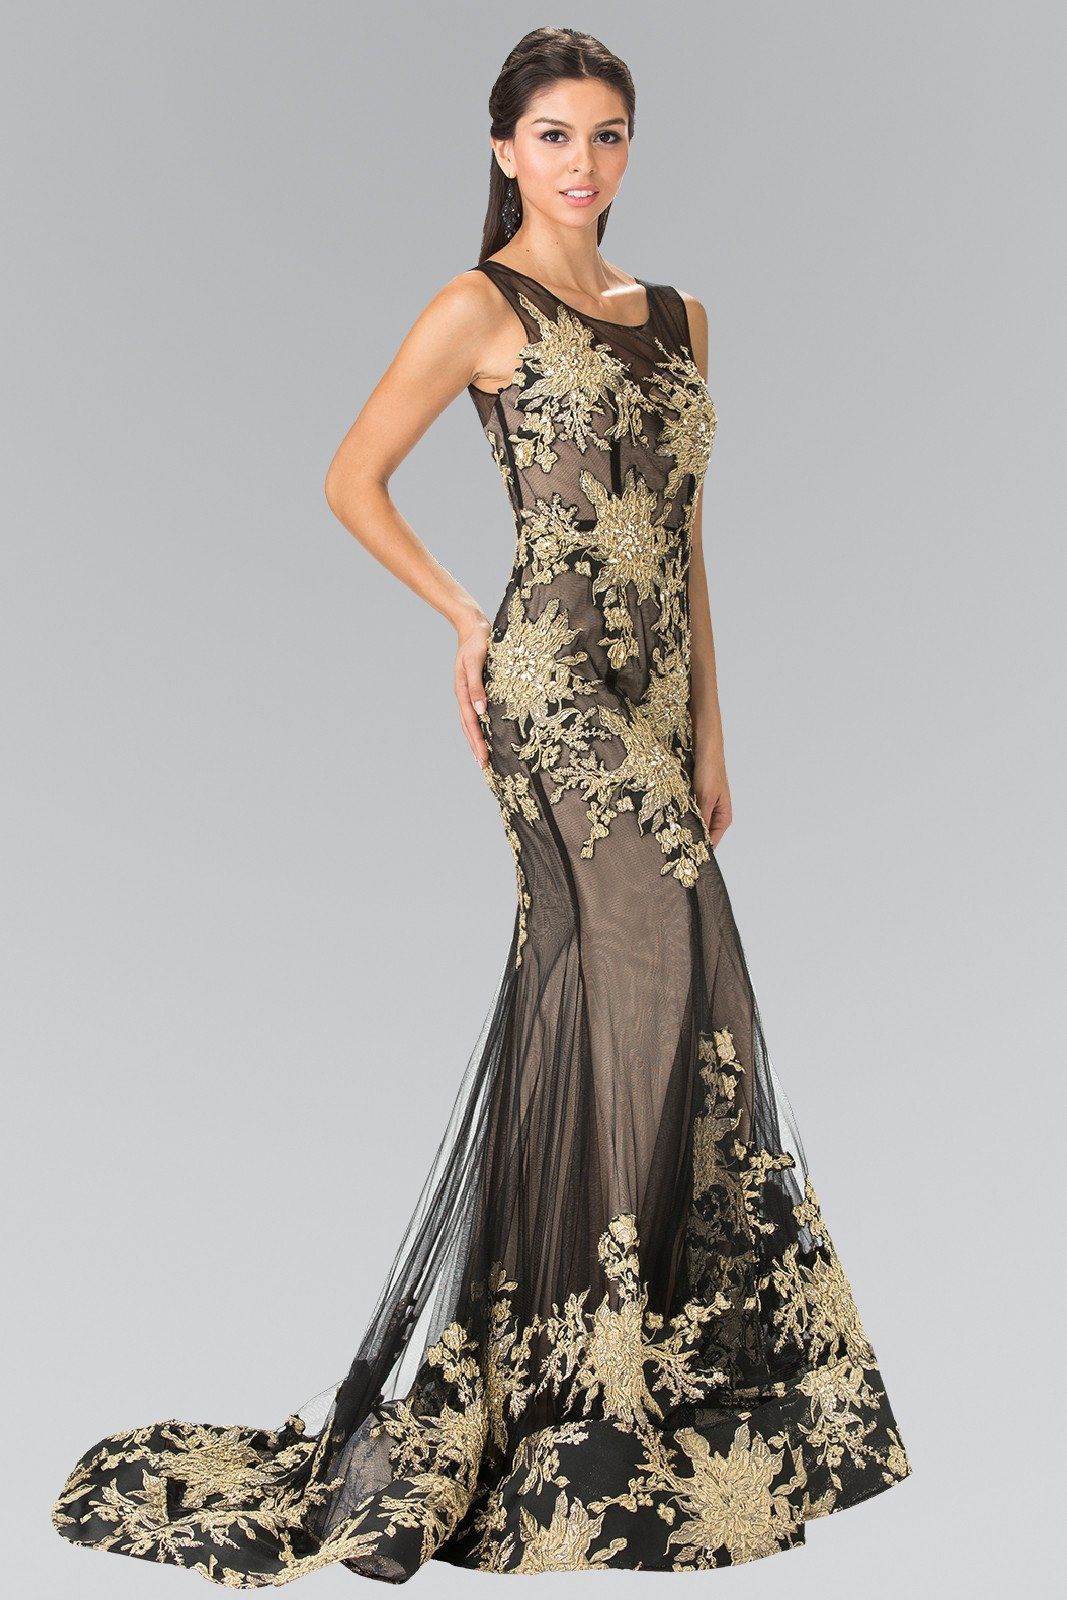 Long Illusion Mermaid Gown with Embroidery by Elizabeth K GL2335-Long Formal Dresses-ABC Fashion